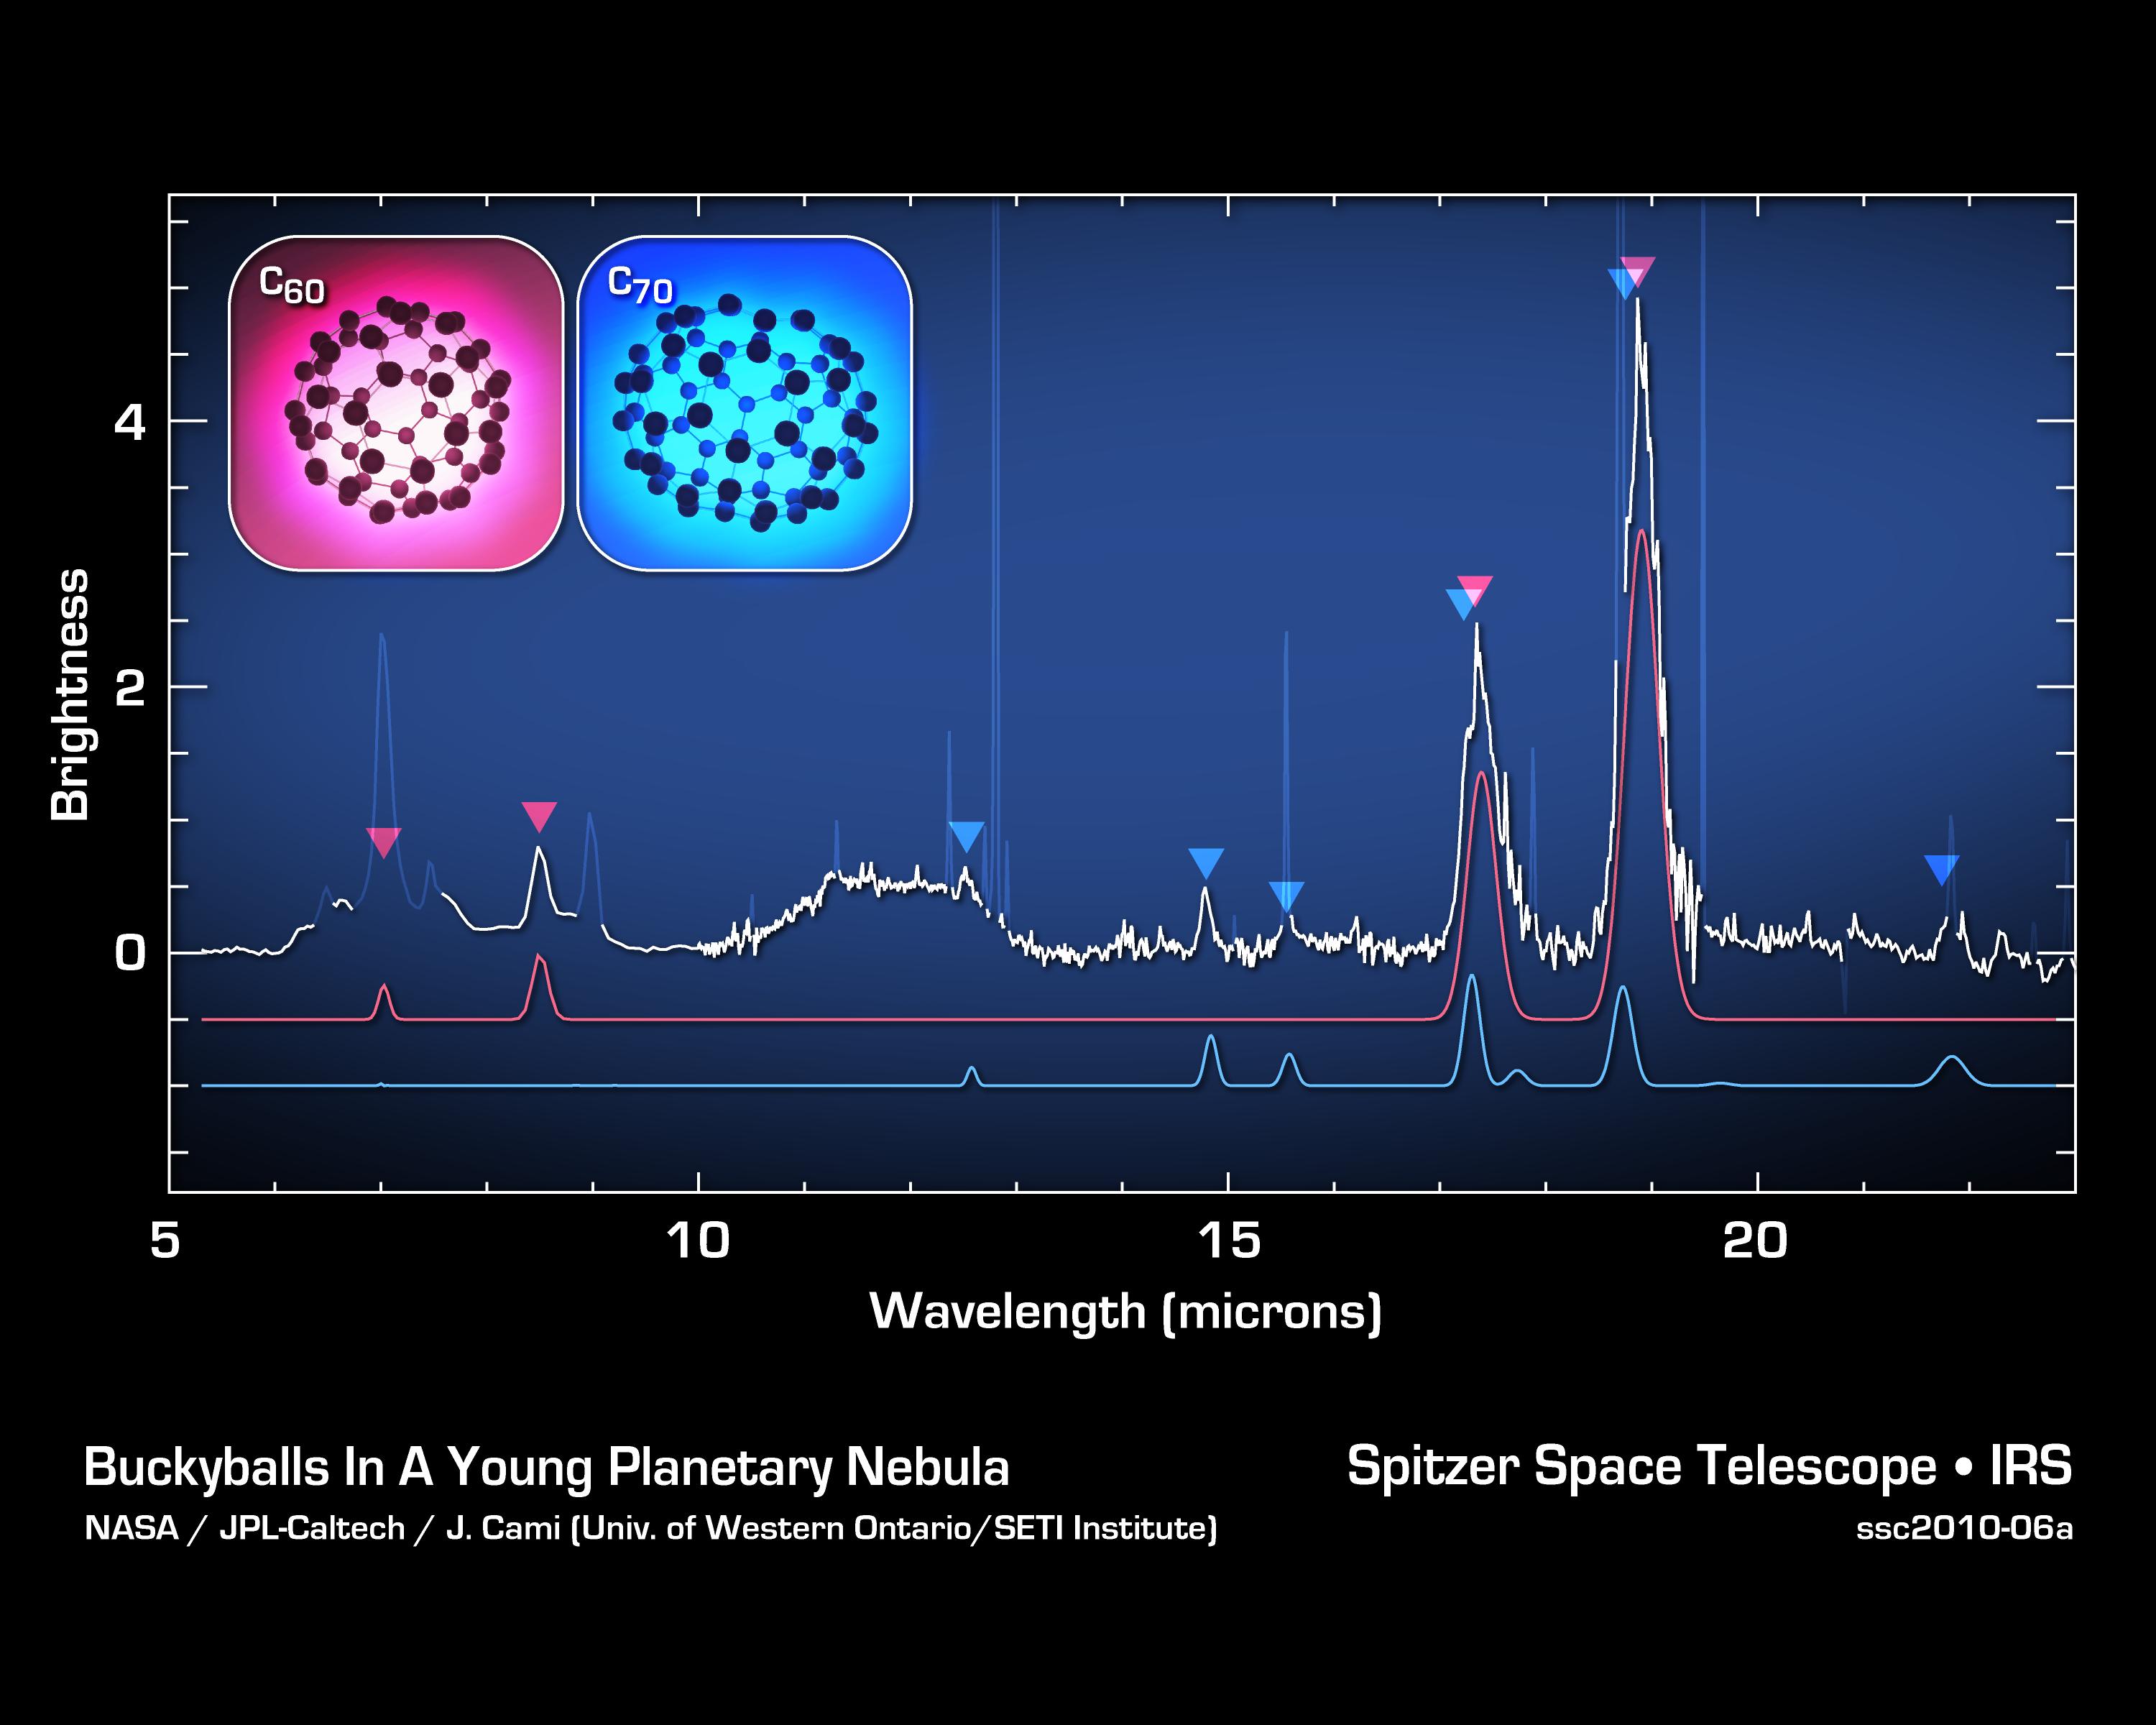 IR spectra of buckyballs in space